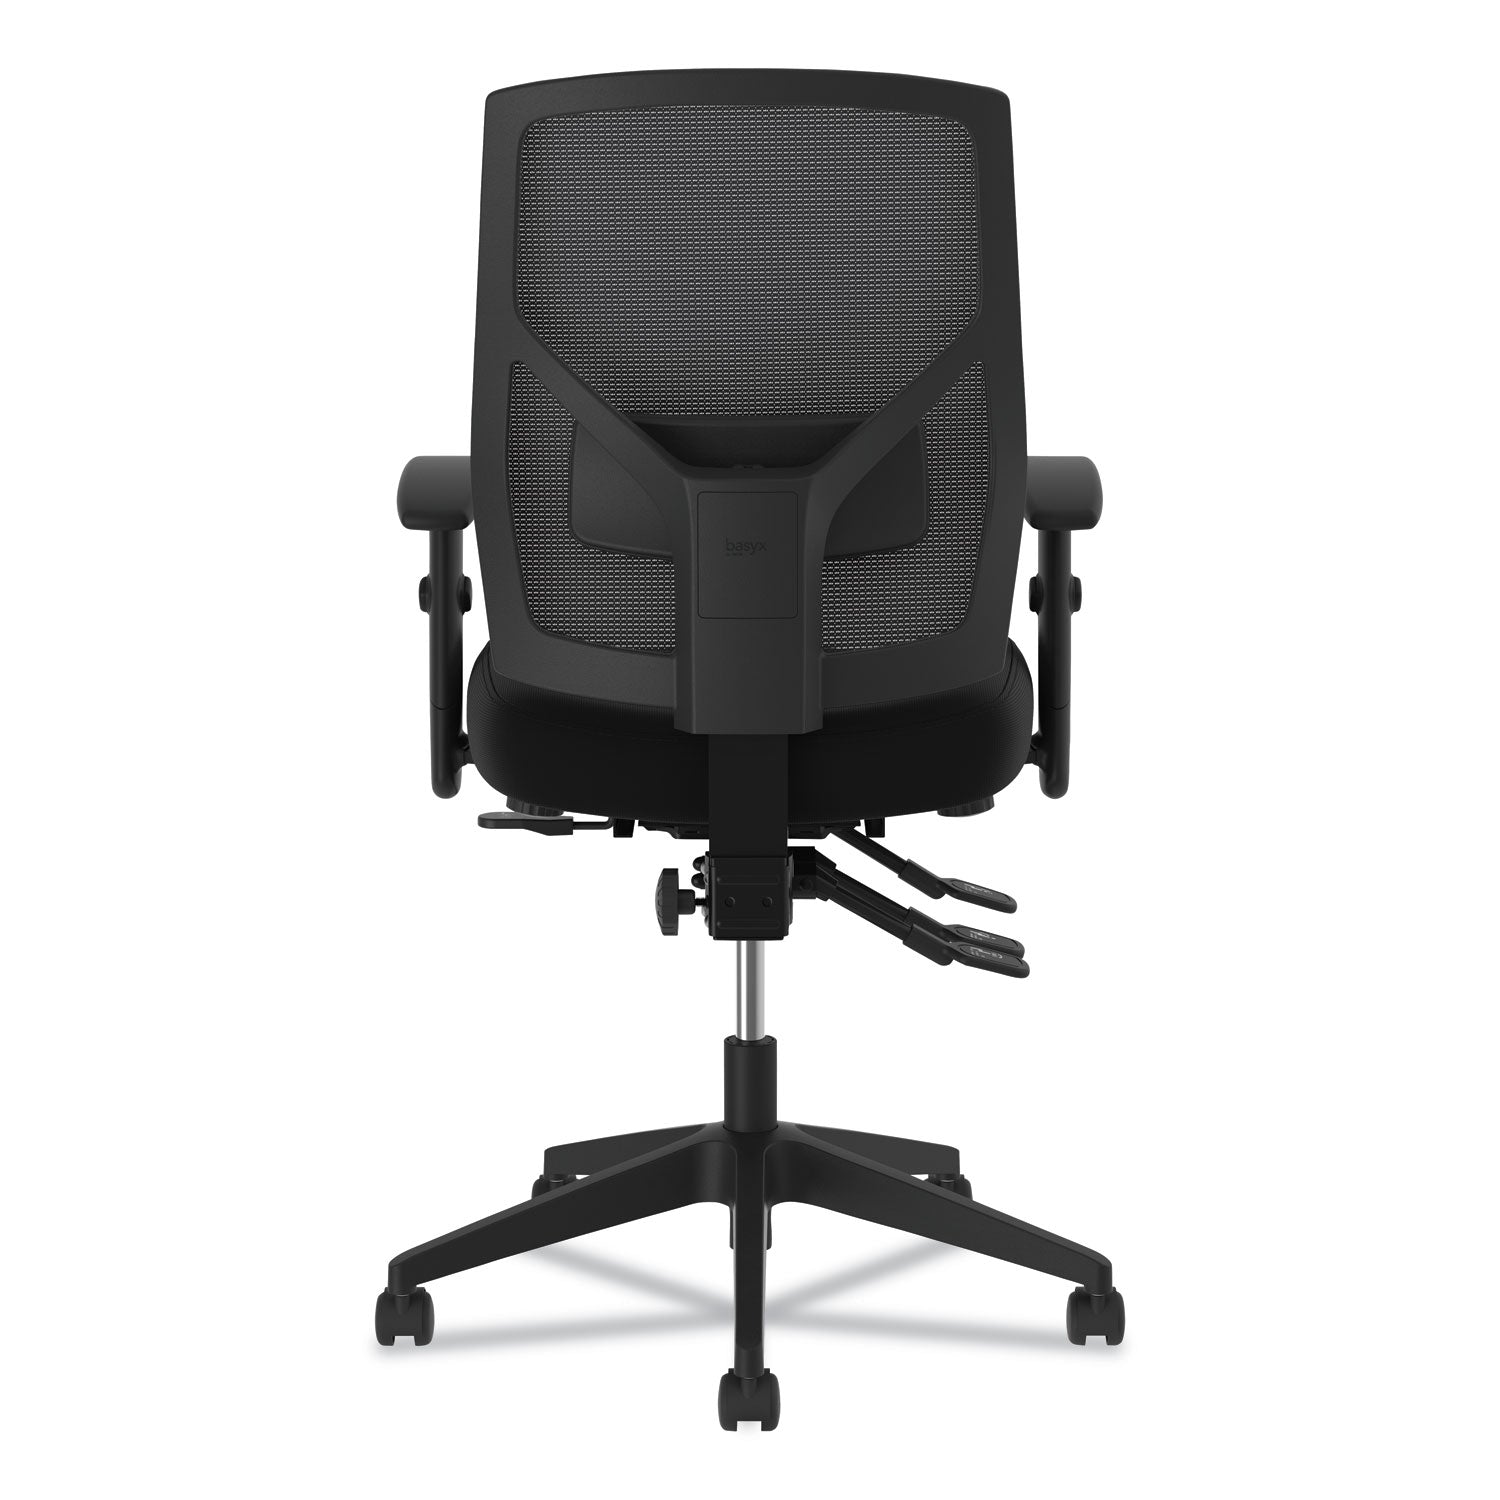 vl582-high-back-task-chair-supports-up-to-250-lb-19-to-22-seat-height-black_bsxvl582es10t - 6